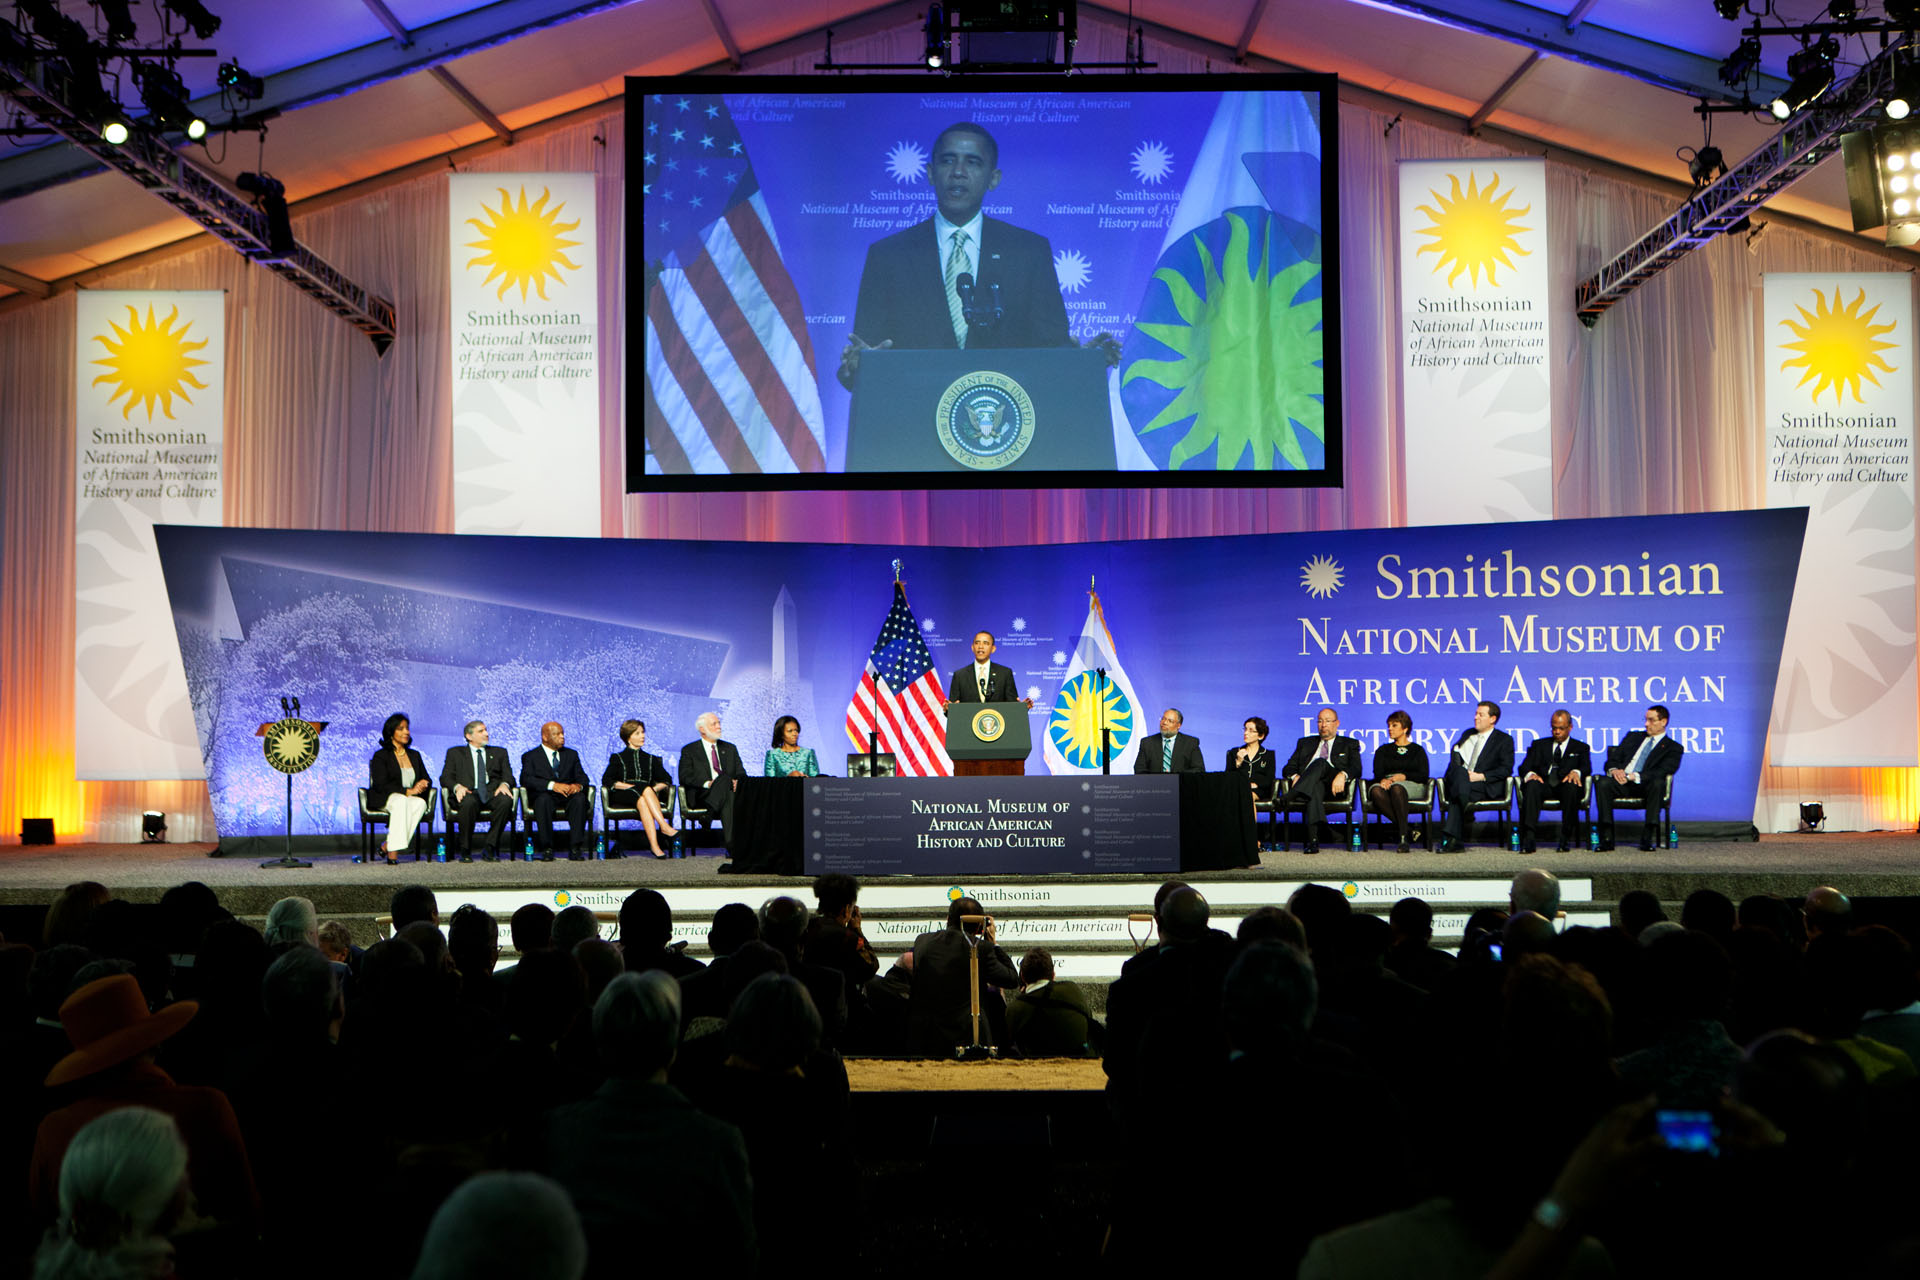 President Obama delivers remarks during the groundbreaking ceremony for the Smithsonian National Museum of African American History and Culture (February 22, 2012)